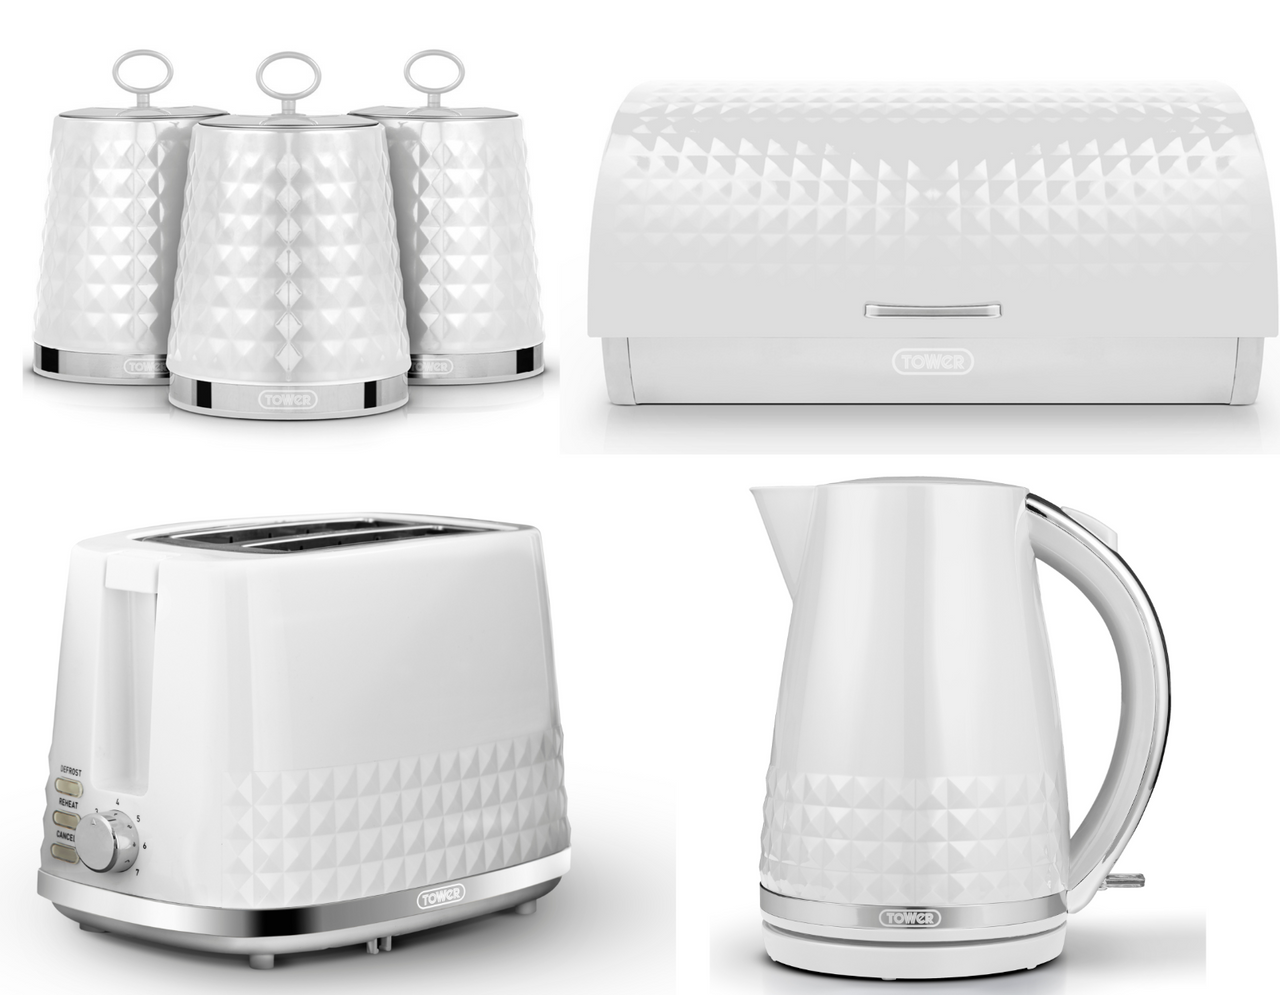 Tower Solitaire Kettle 2 Slice Toaster Bread Bin & Canisters Set White & Chrome